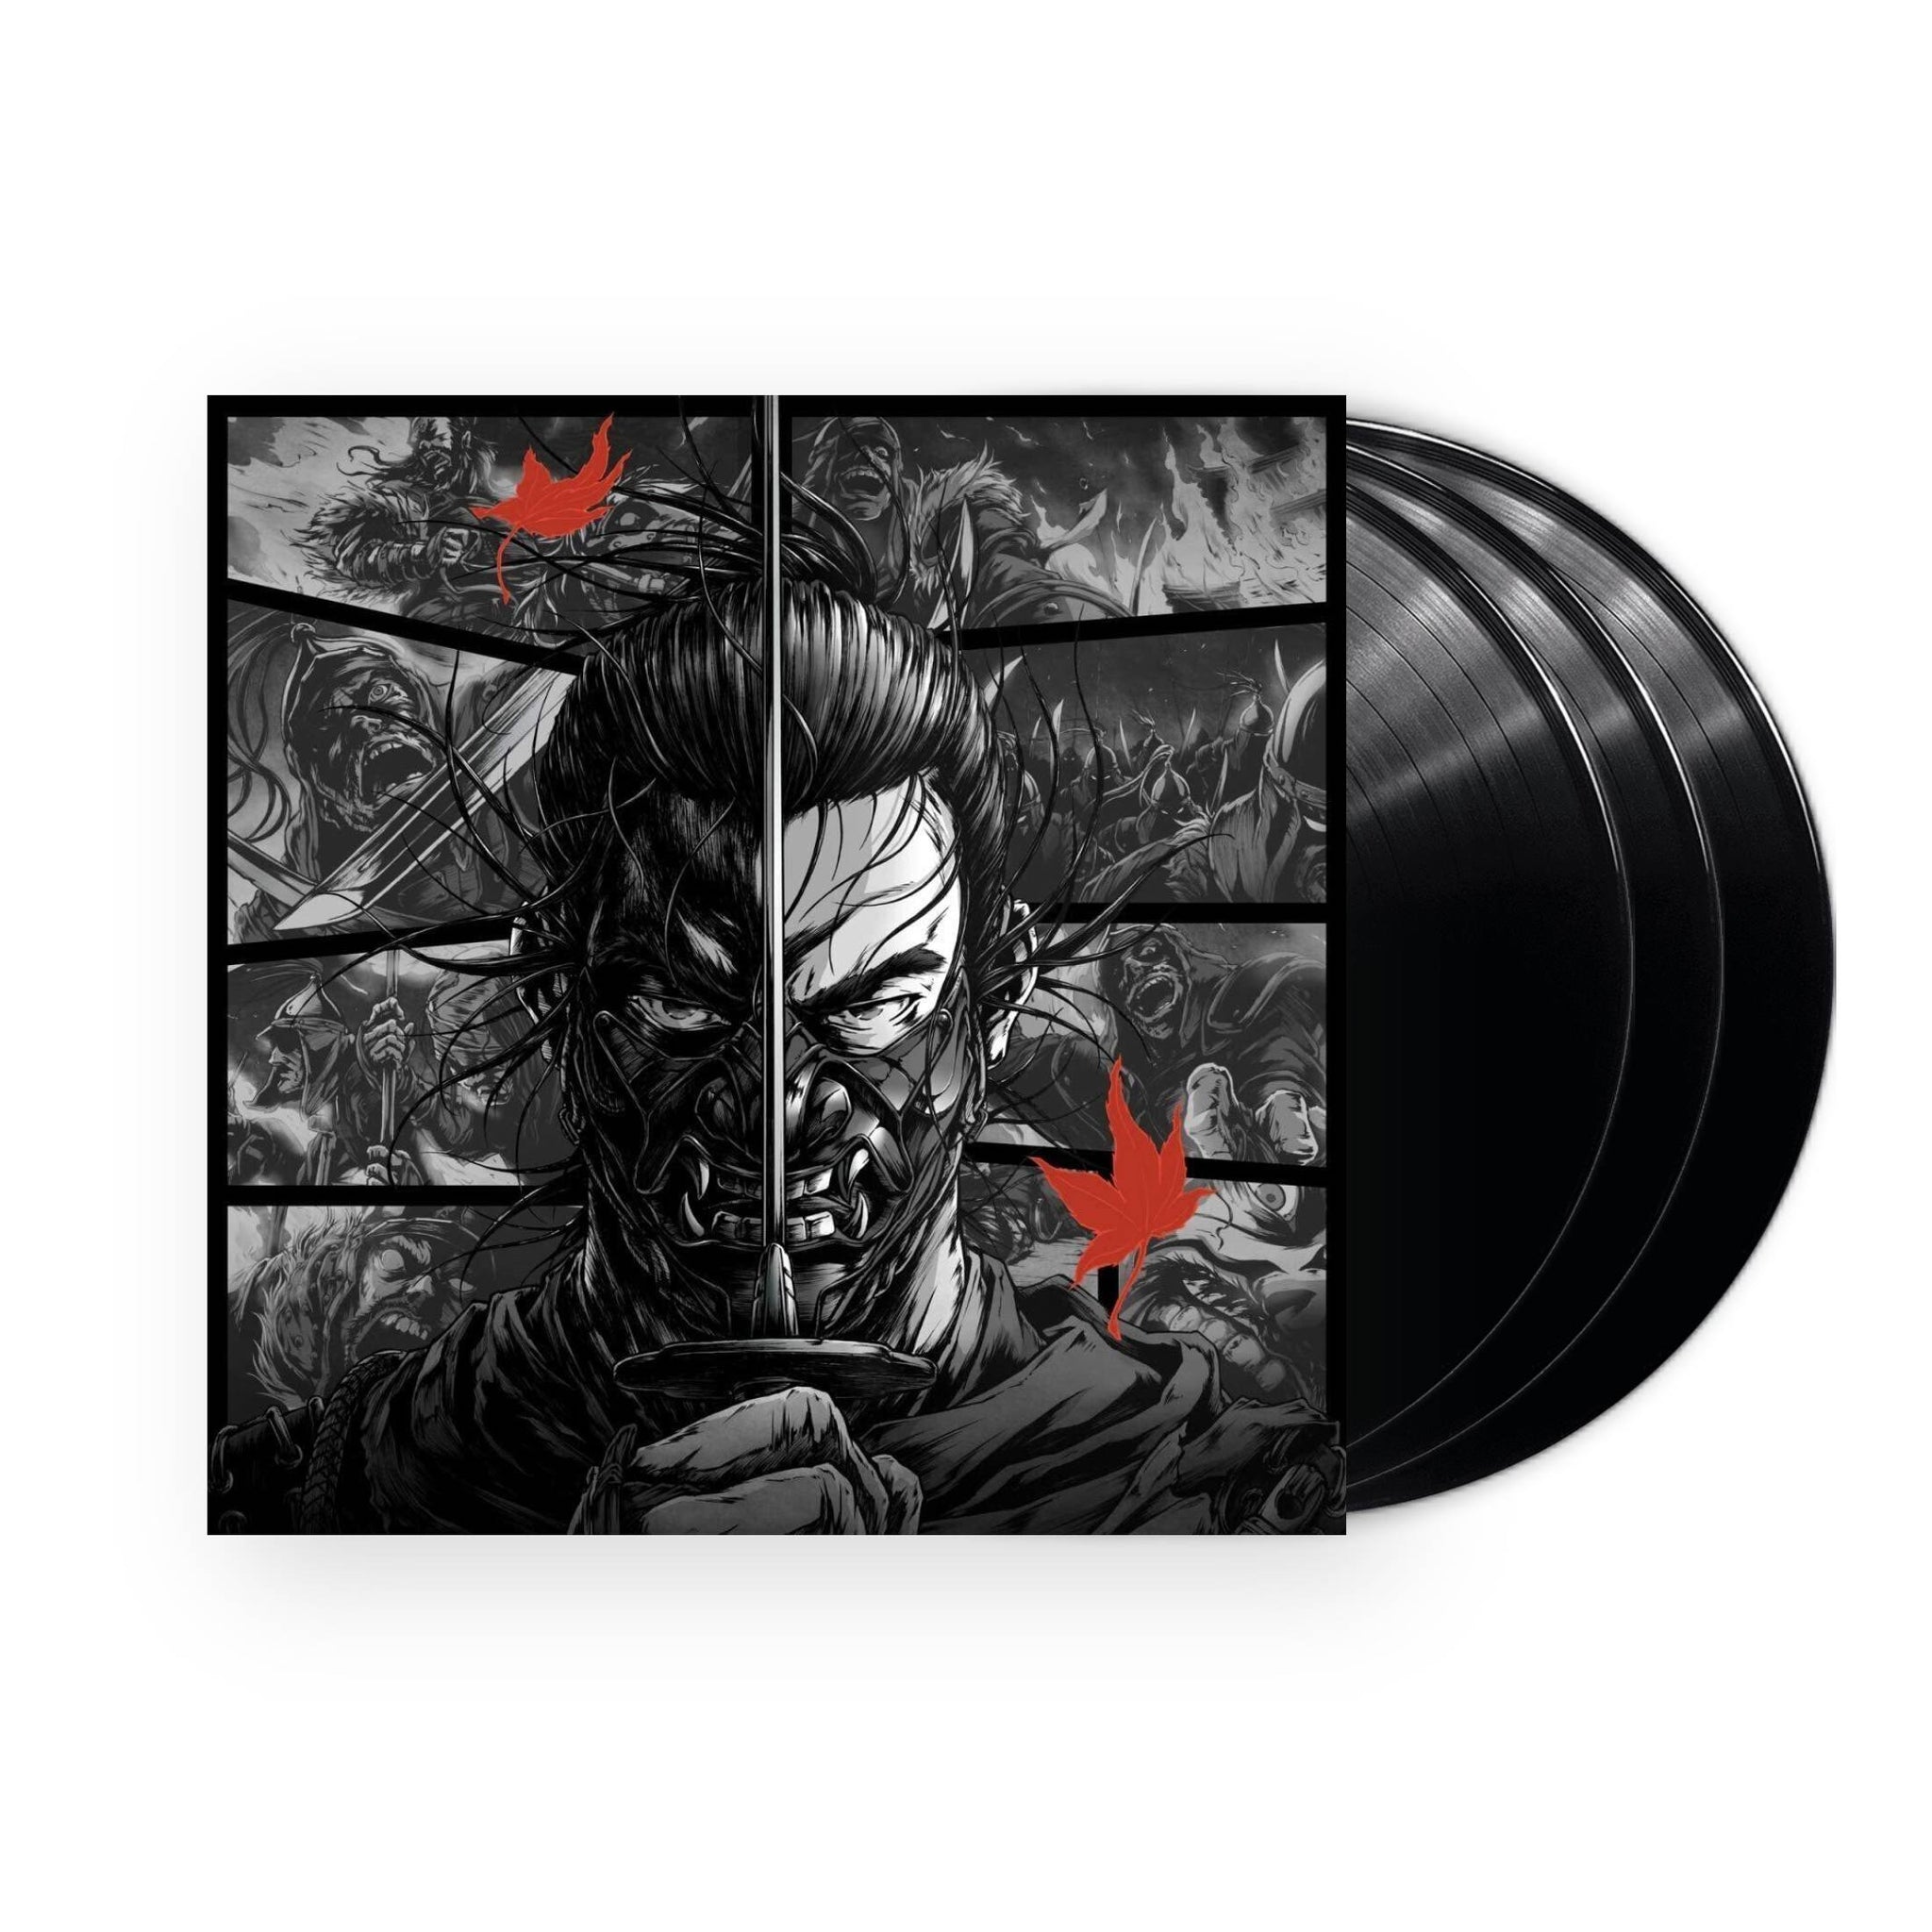 Ghost of Tsushima - Music from the Video Game Soundtrack 3xLP (Black Vinyl)